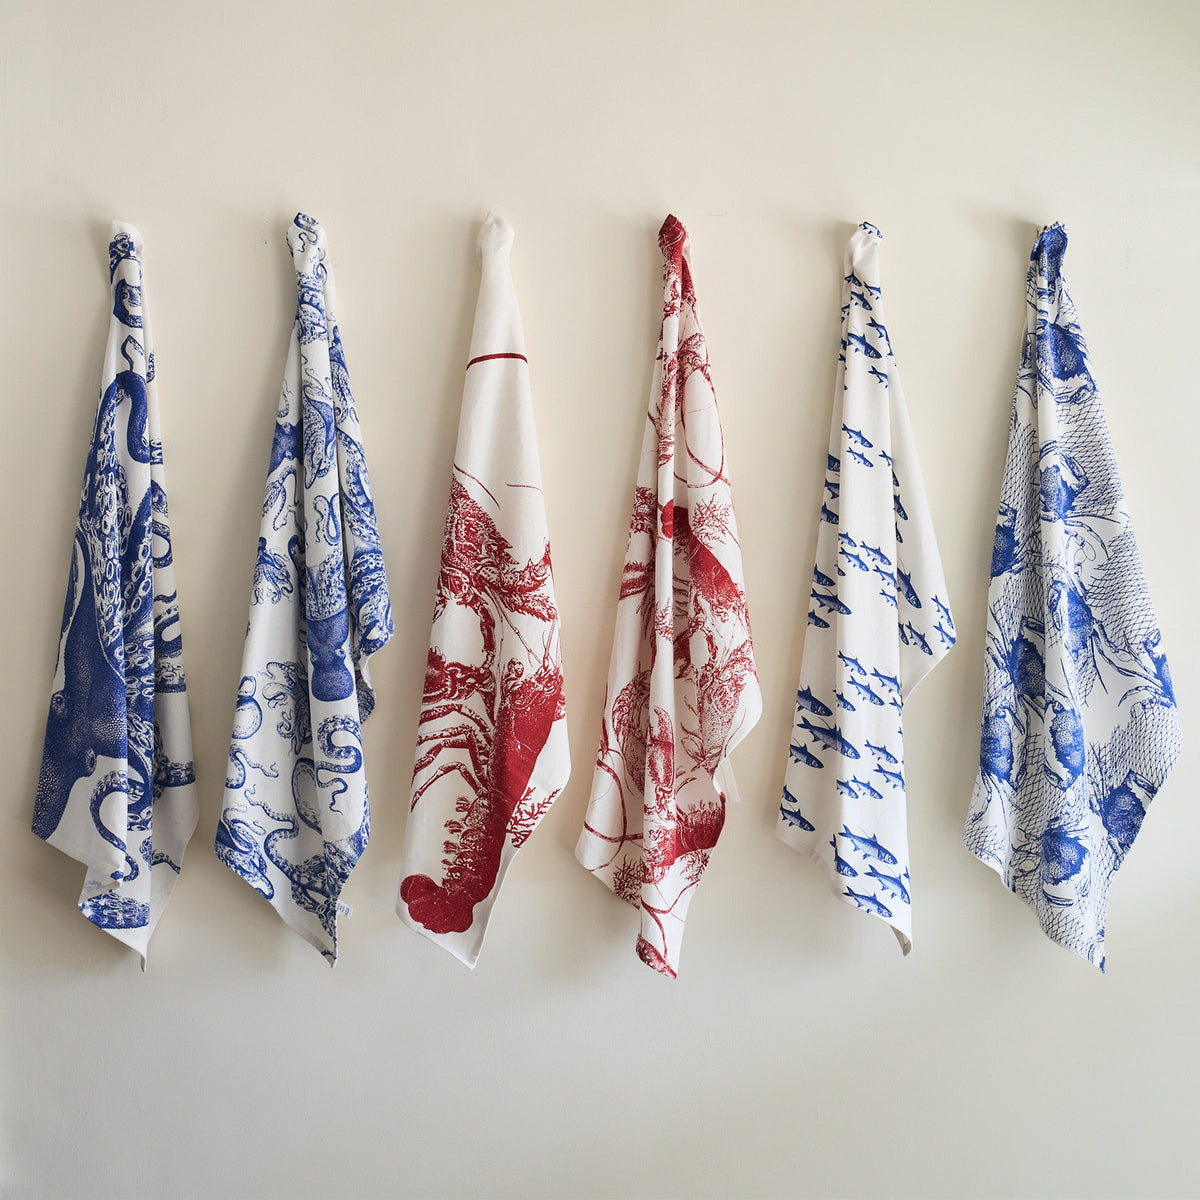 A row of Caskata Lucy Kitchen Towels Set/2, made from 100% cotton, hanging on a wall.